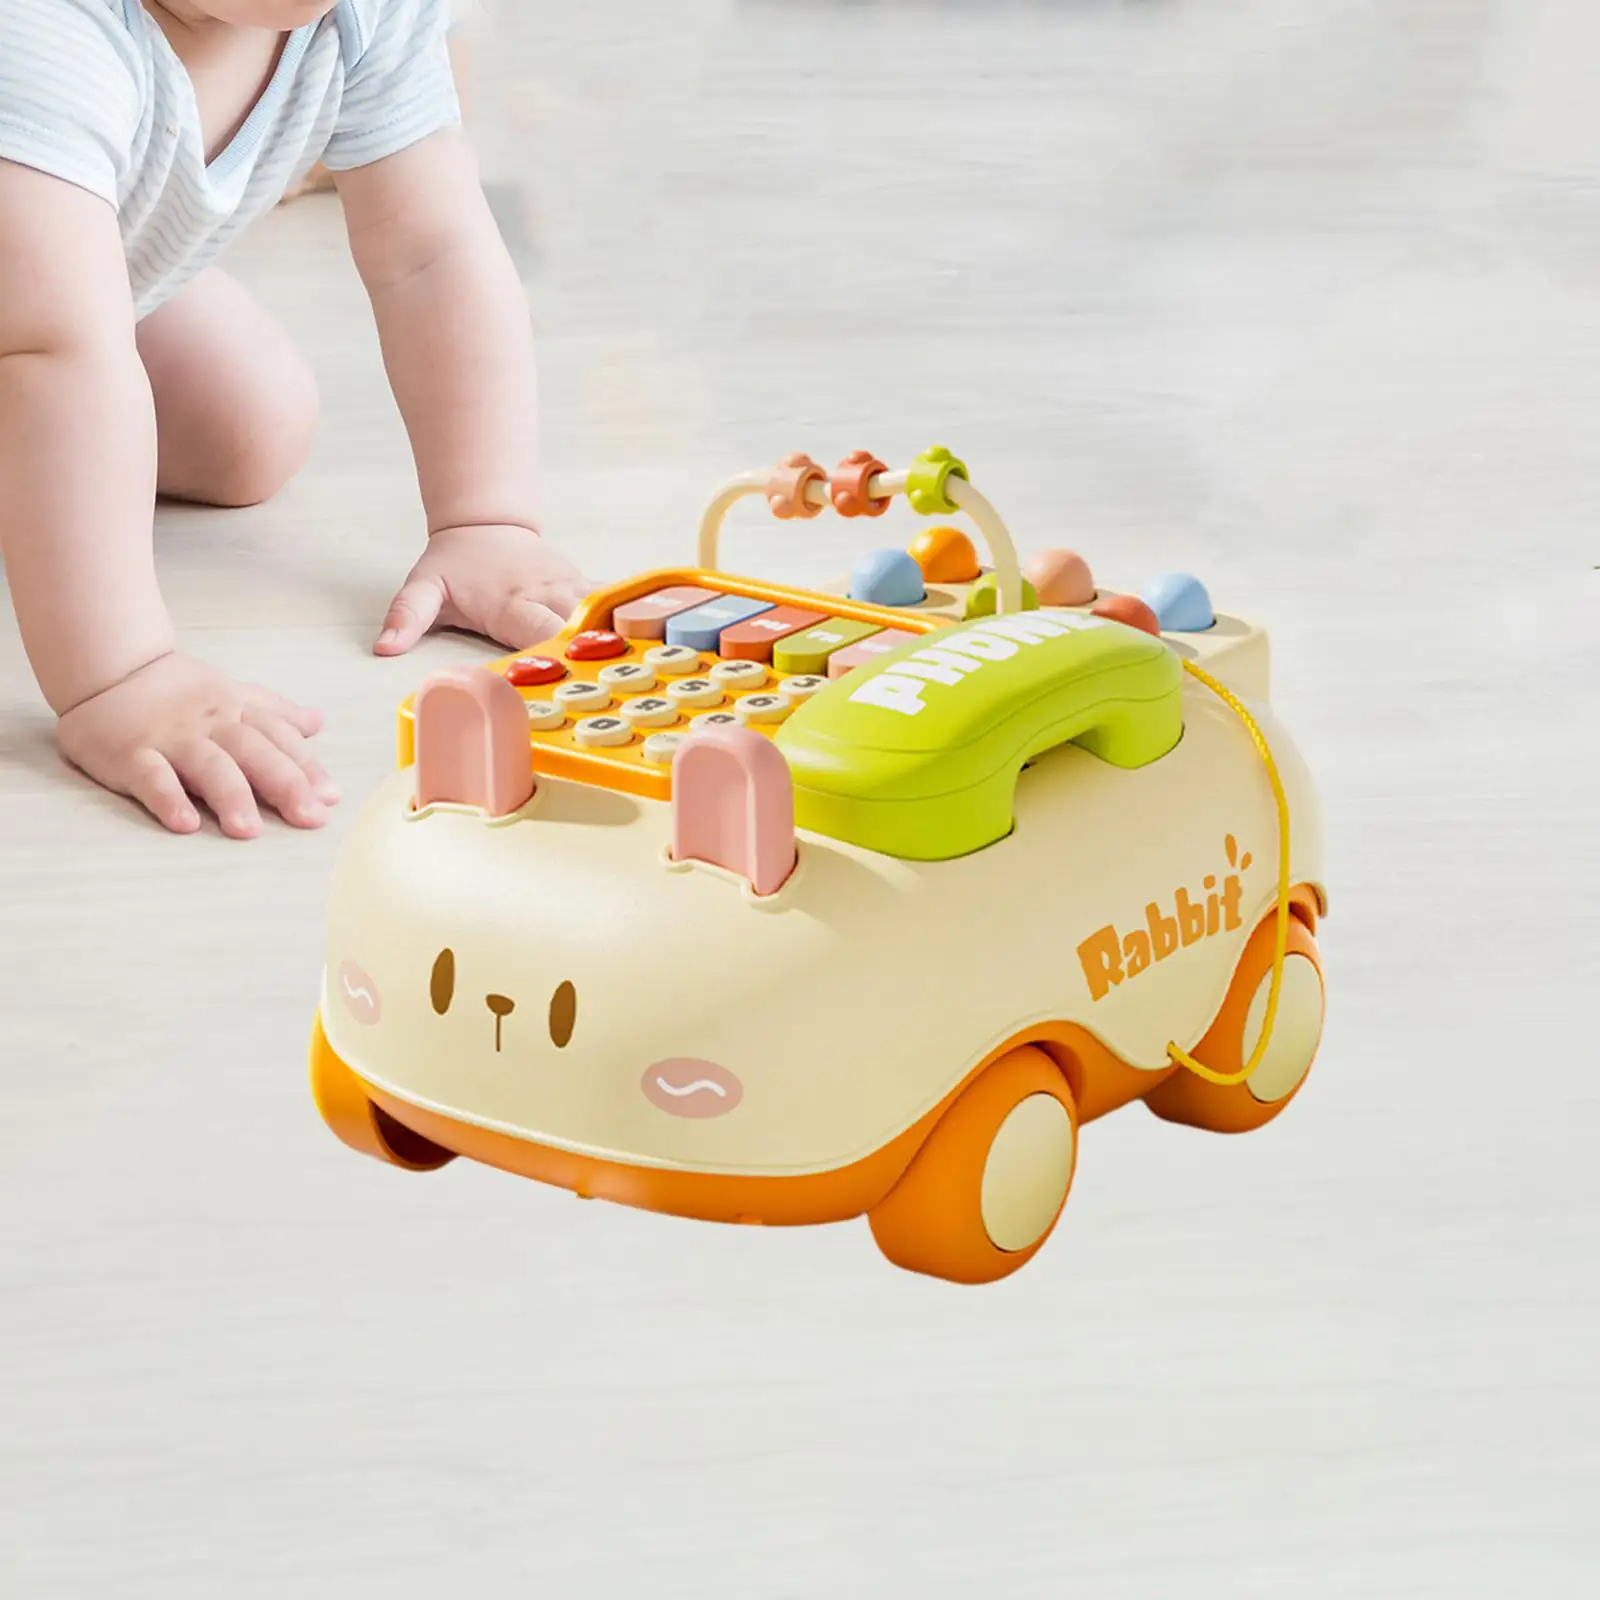 Baby Telephone Toy with Music and Lights Multifunction Baby Piano Parent Child Interactive Toy for Boys Baby Kids Birthday Gift